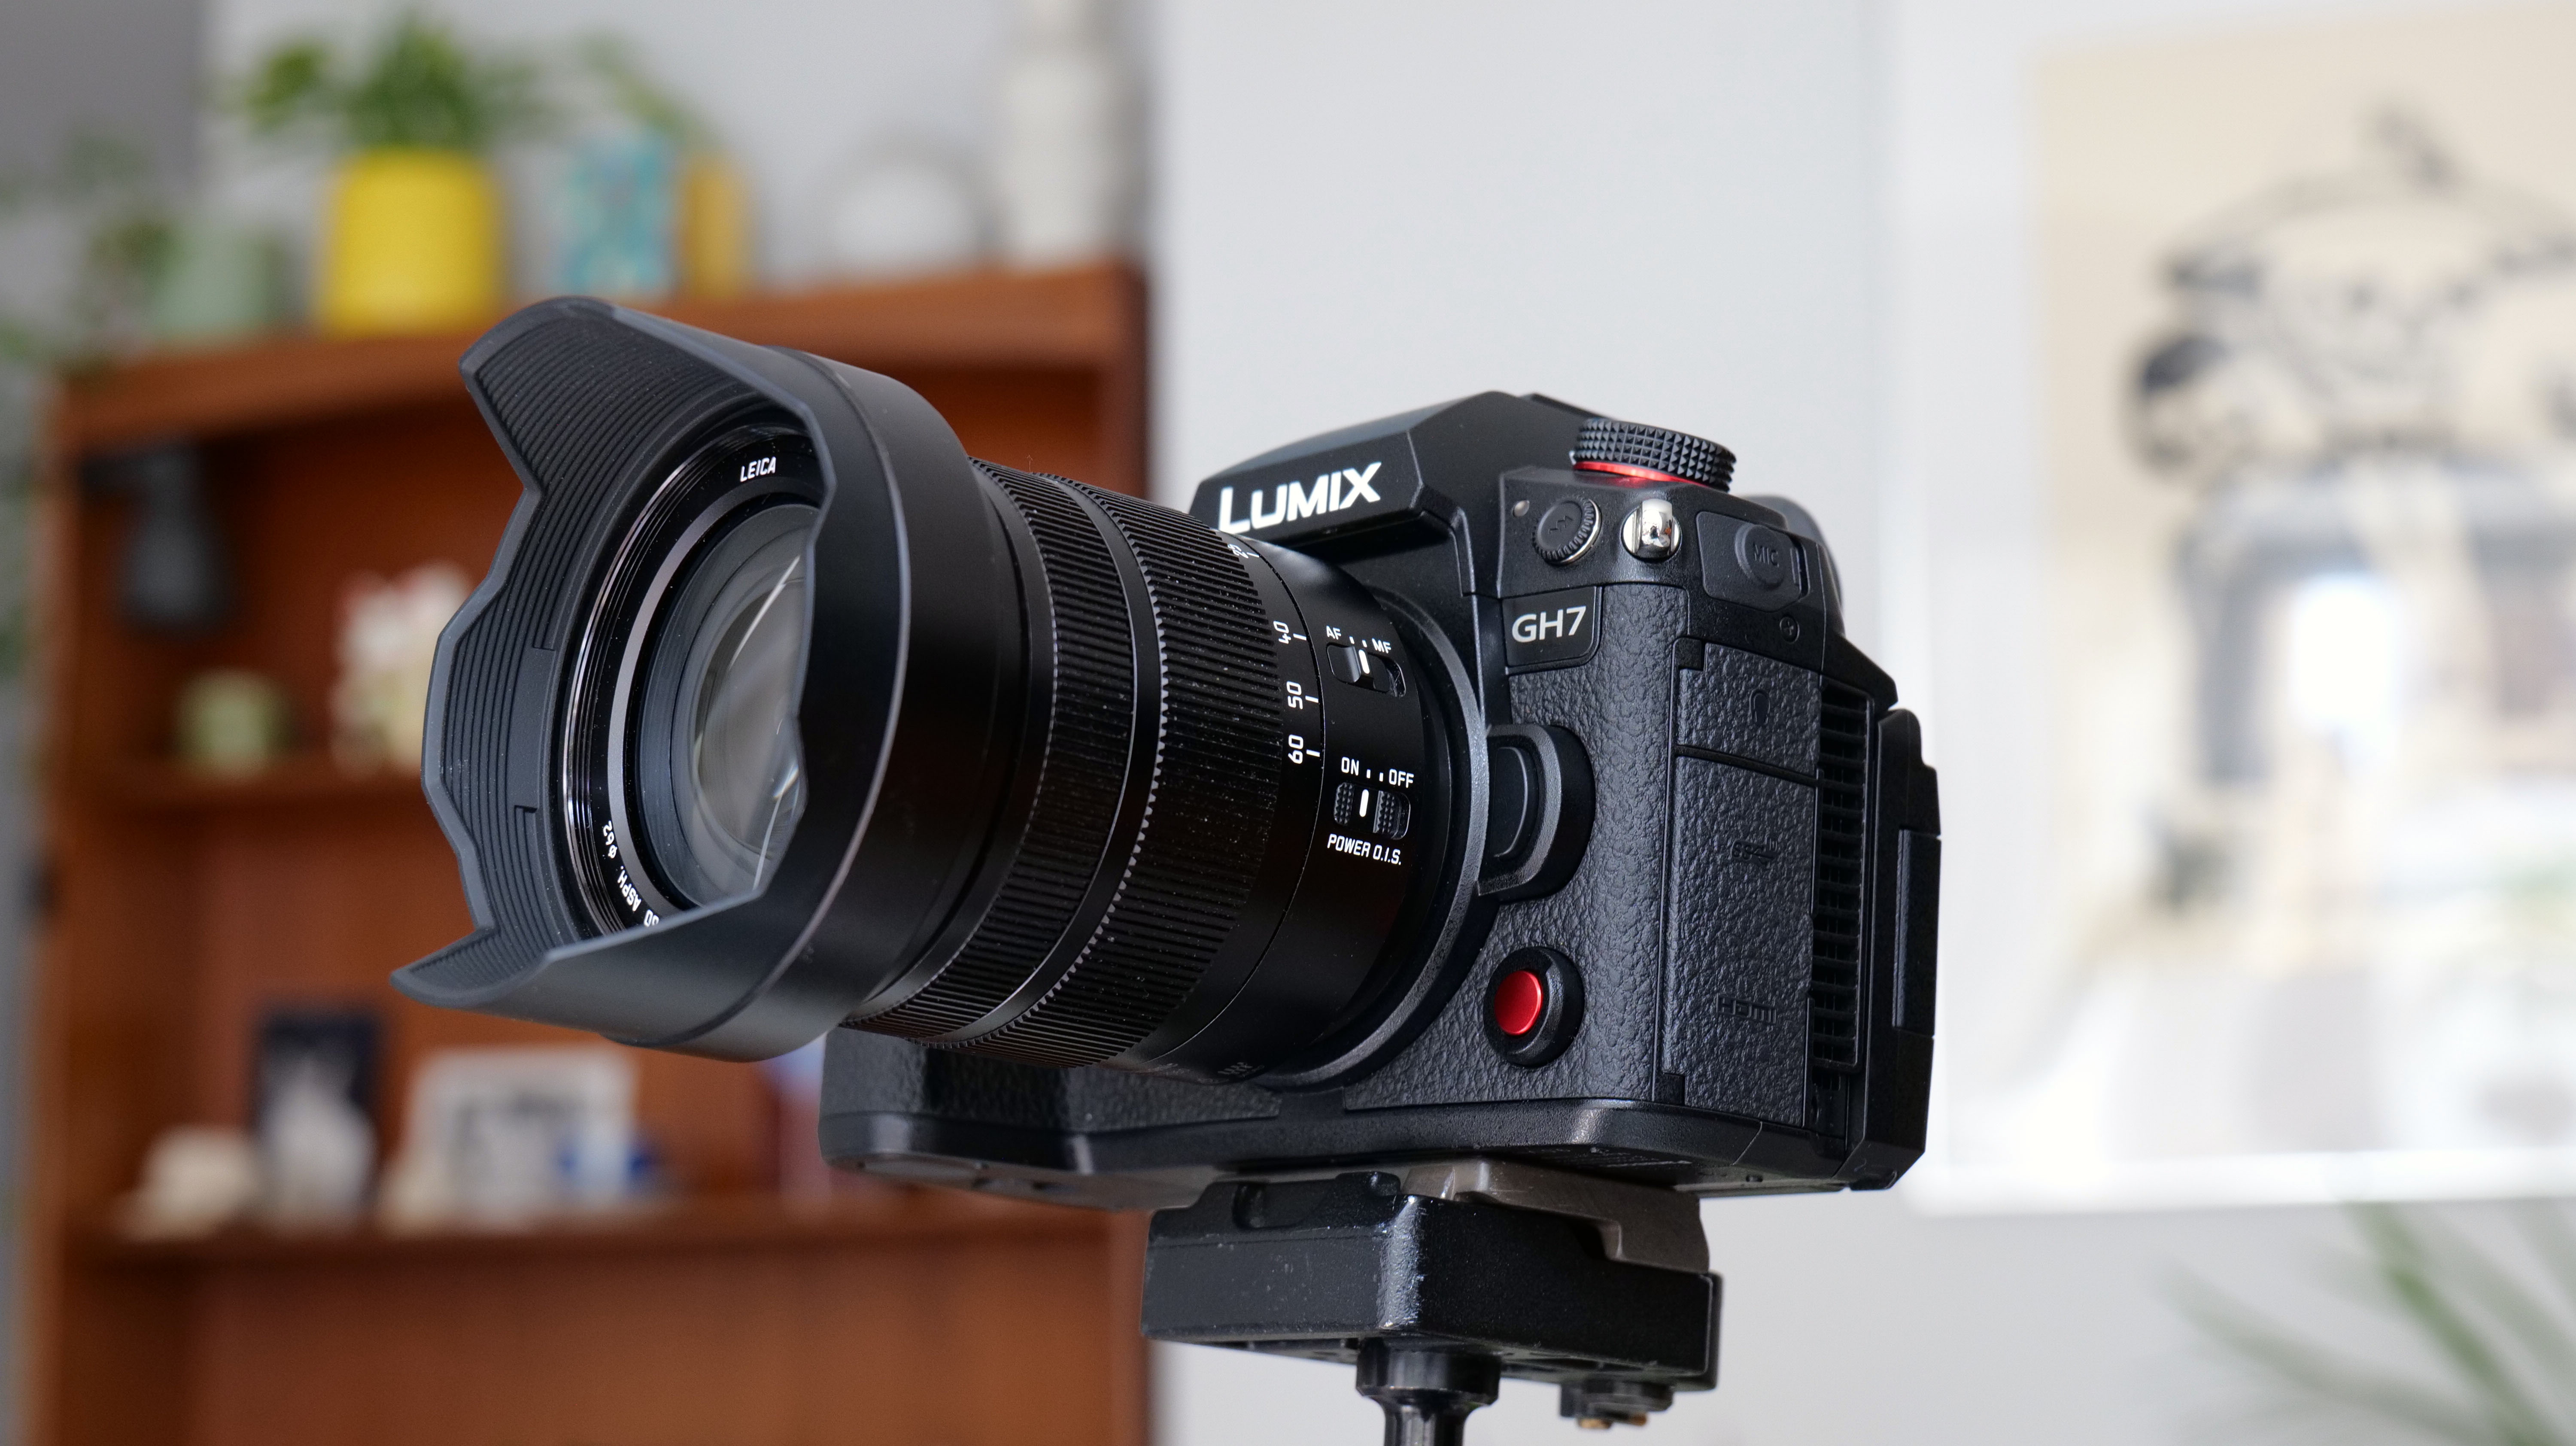 Panasonic Lumix GH7 camera and lens being adjusted